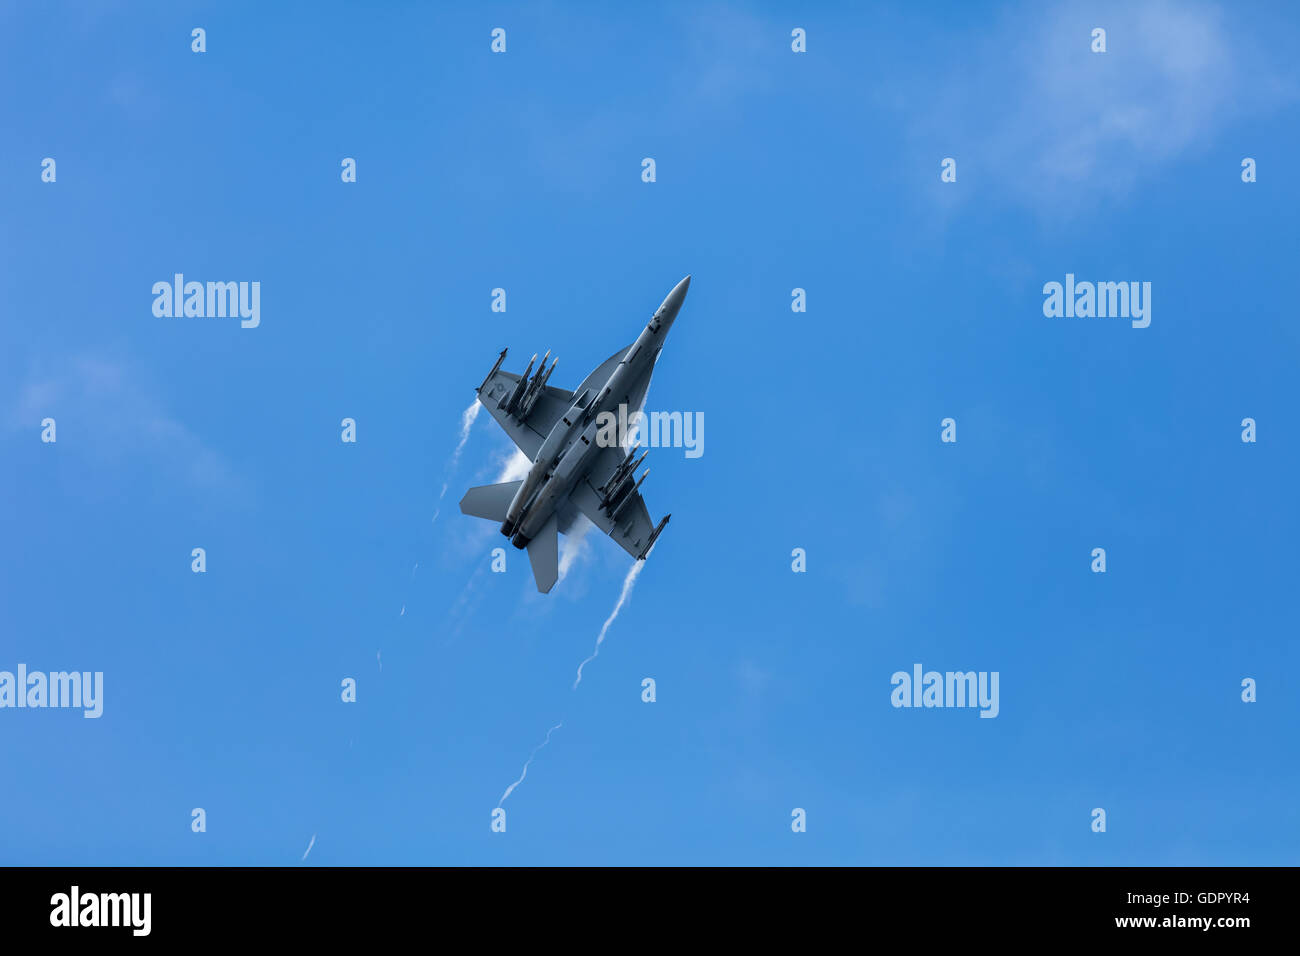 F/A 18 Super Hornet fighter plane in the sky with smoke trails from its wings Stock Photo